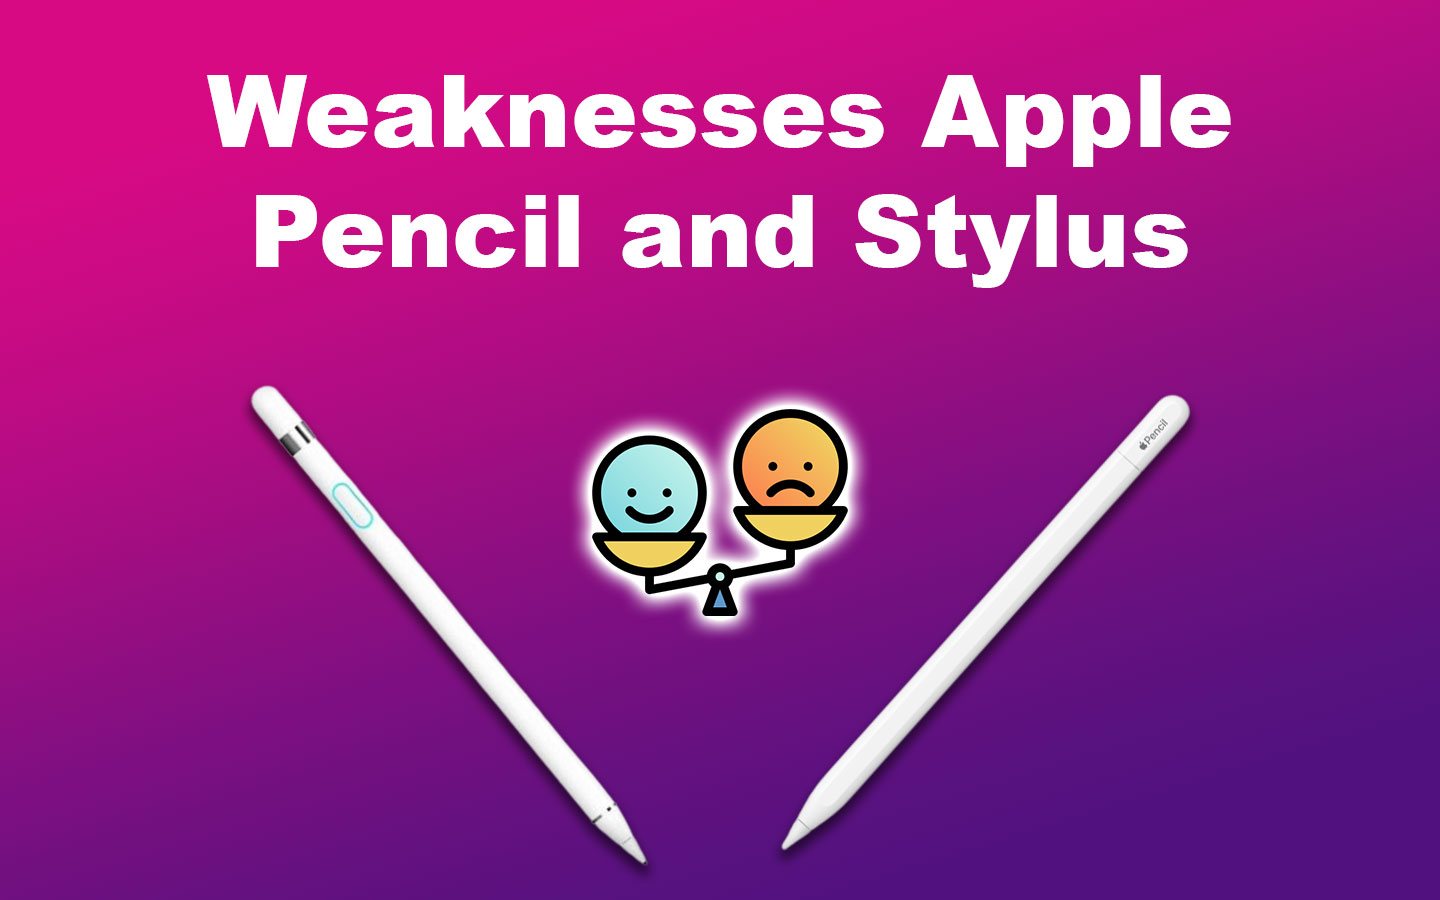 Weaknesses Apple Pencil and Stylus